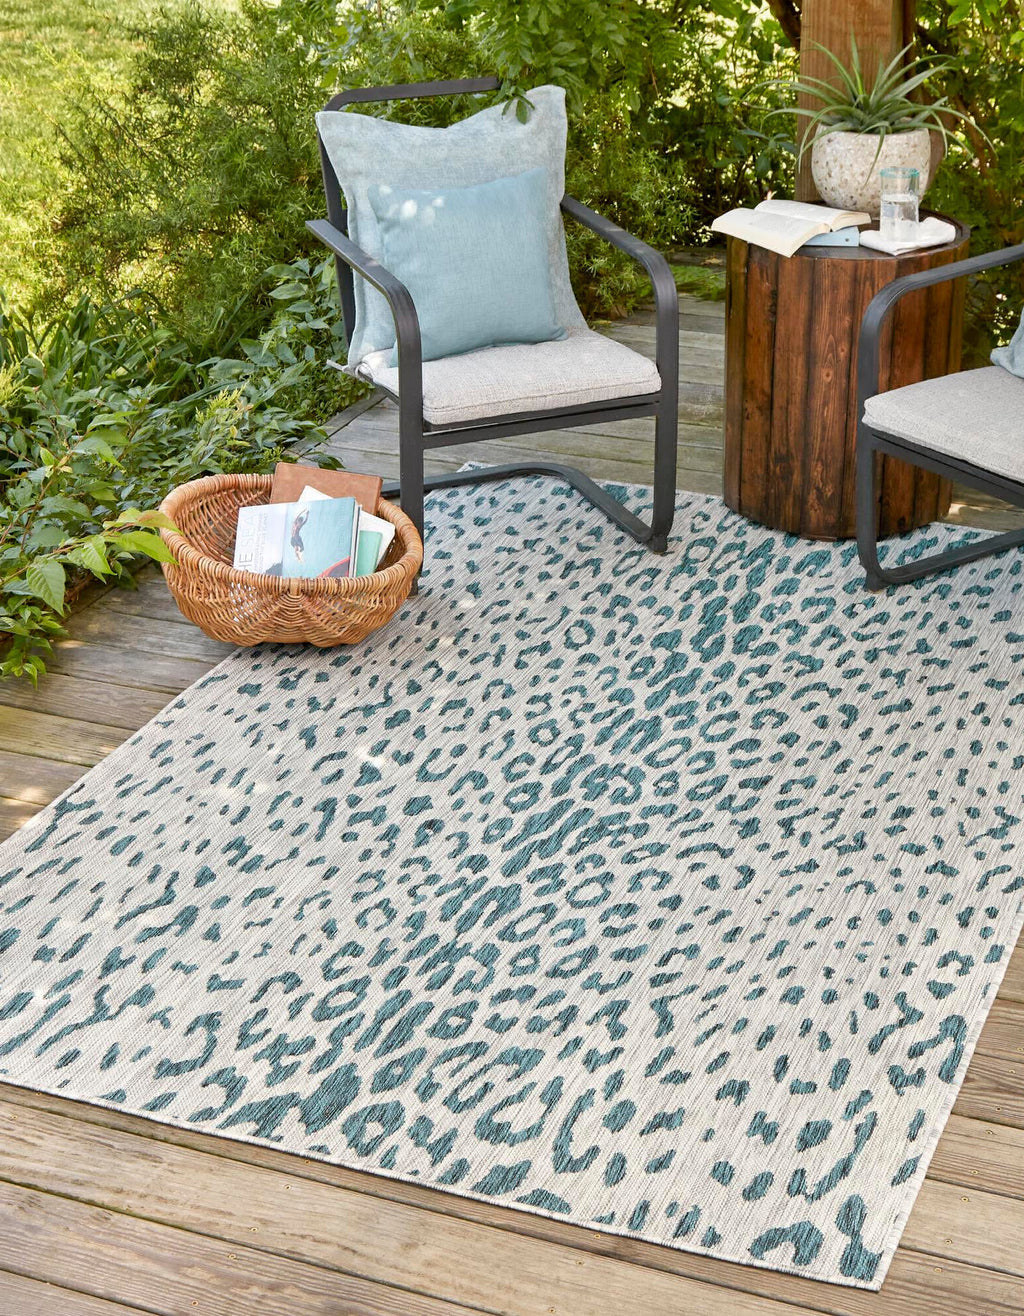 Unique Loom Outdoor Safari T-KZOD23 Teal Area Rug Rectangle Lifestyle Image Feature